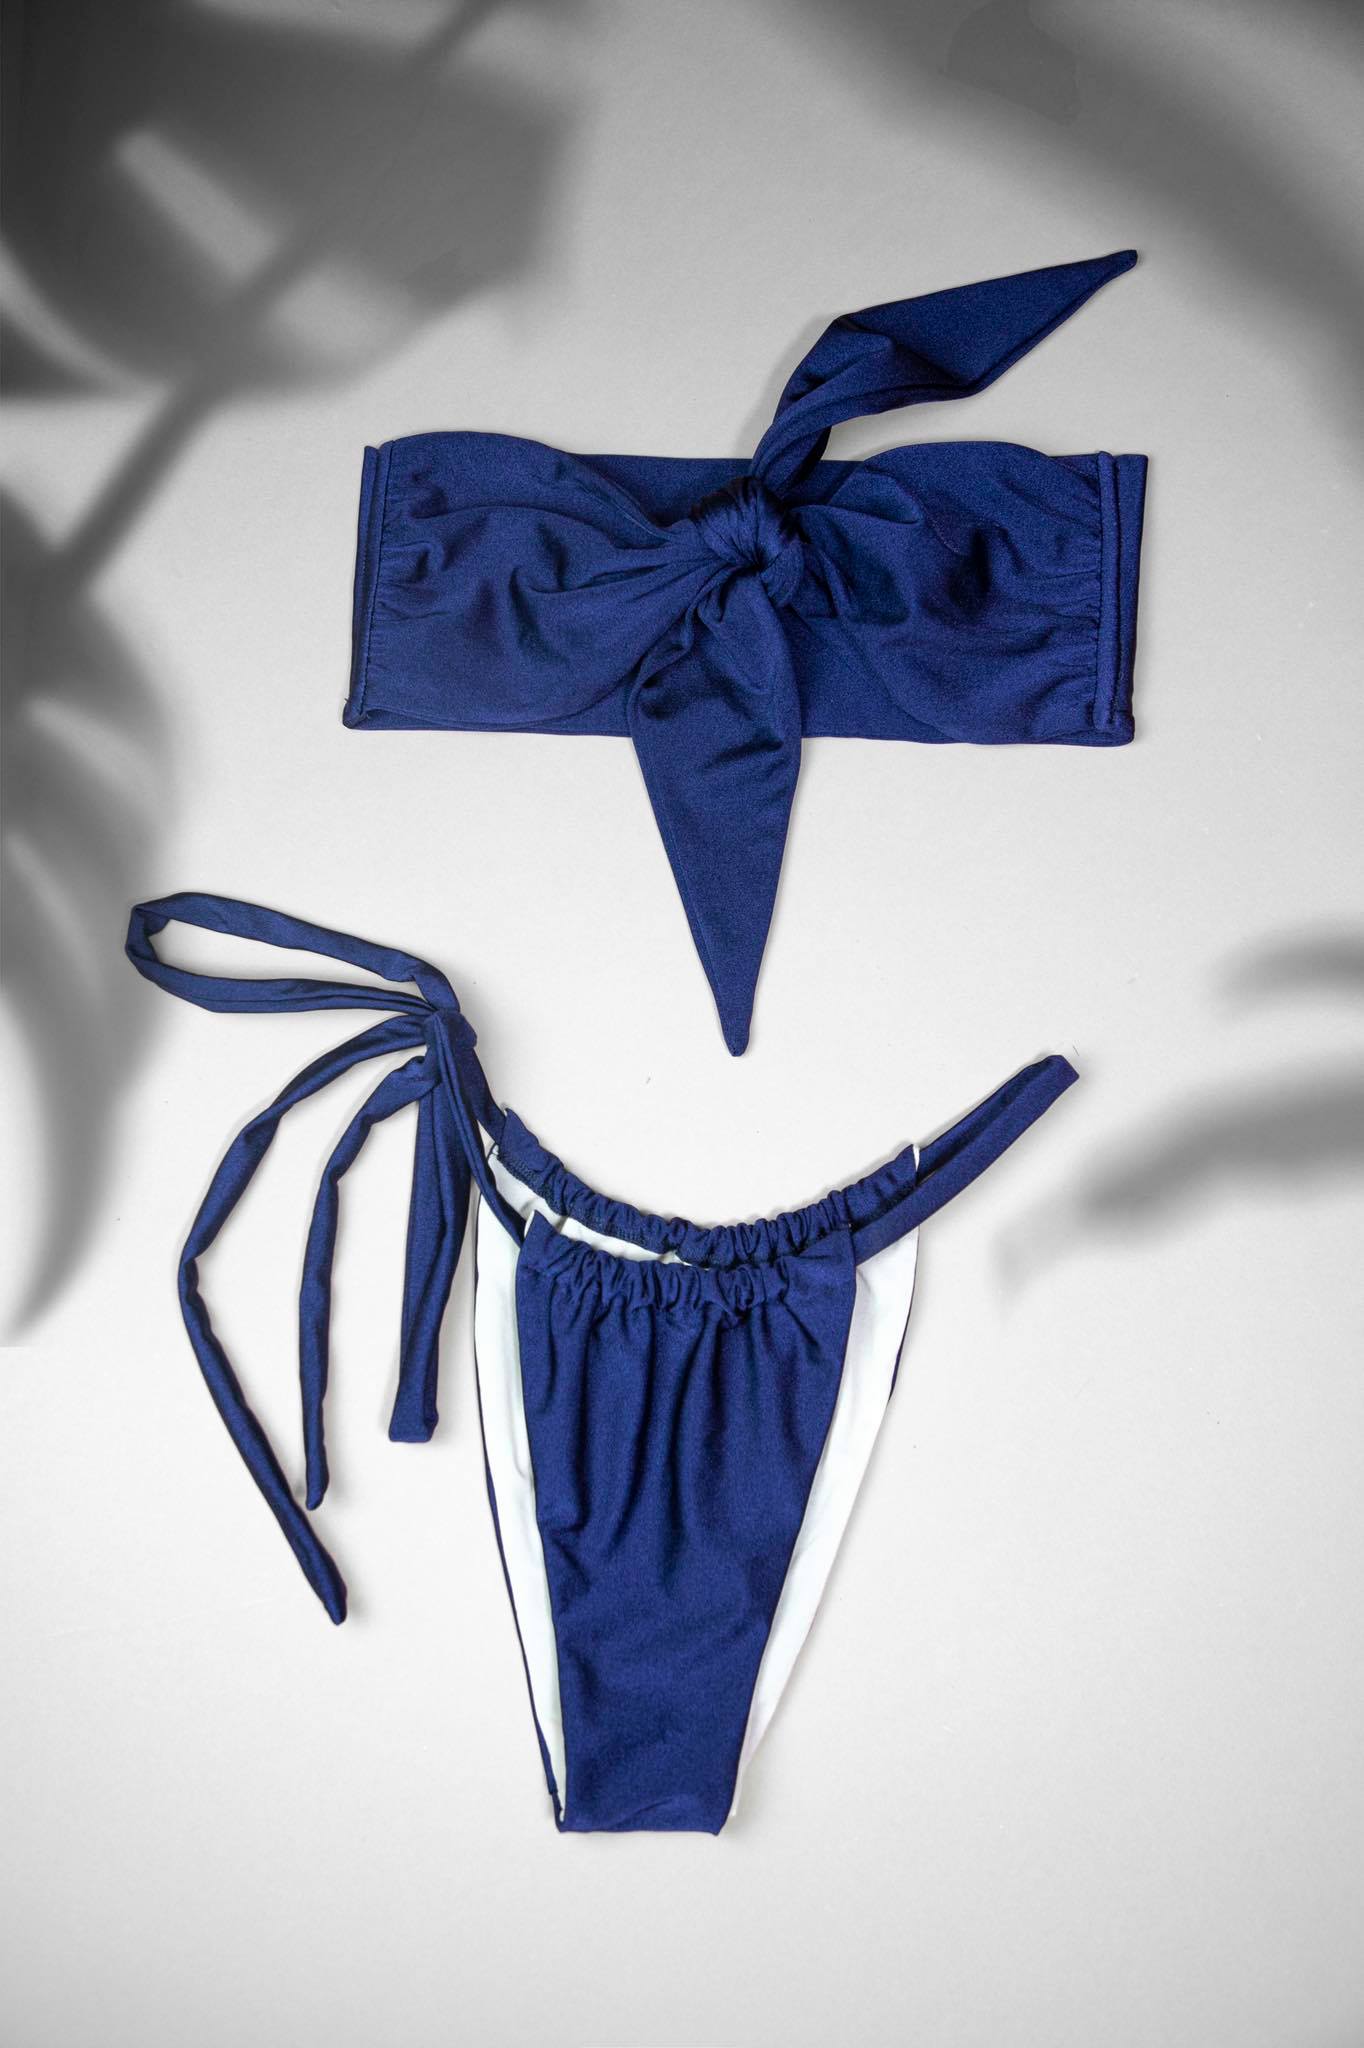 Blue Marine 2in1 bikini suit from two parts